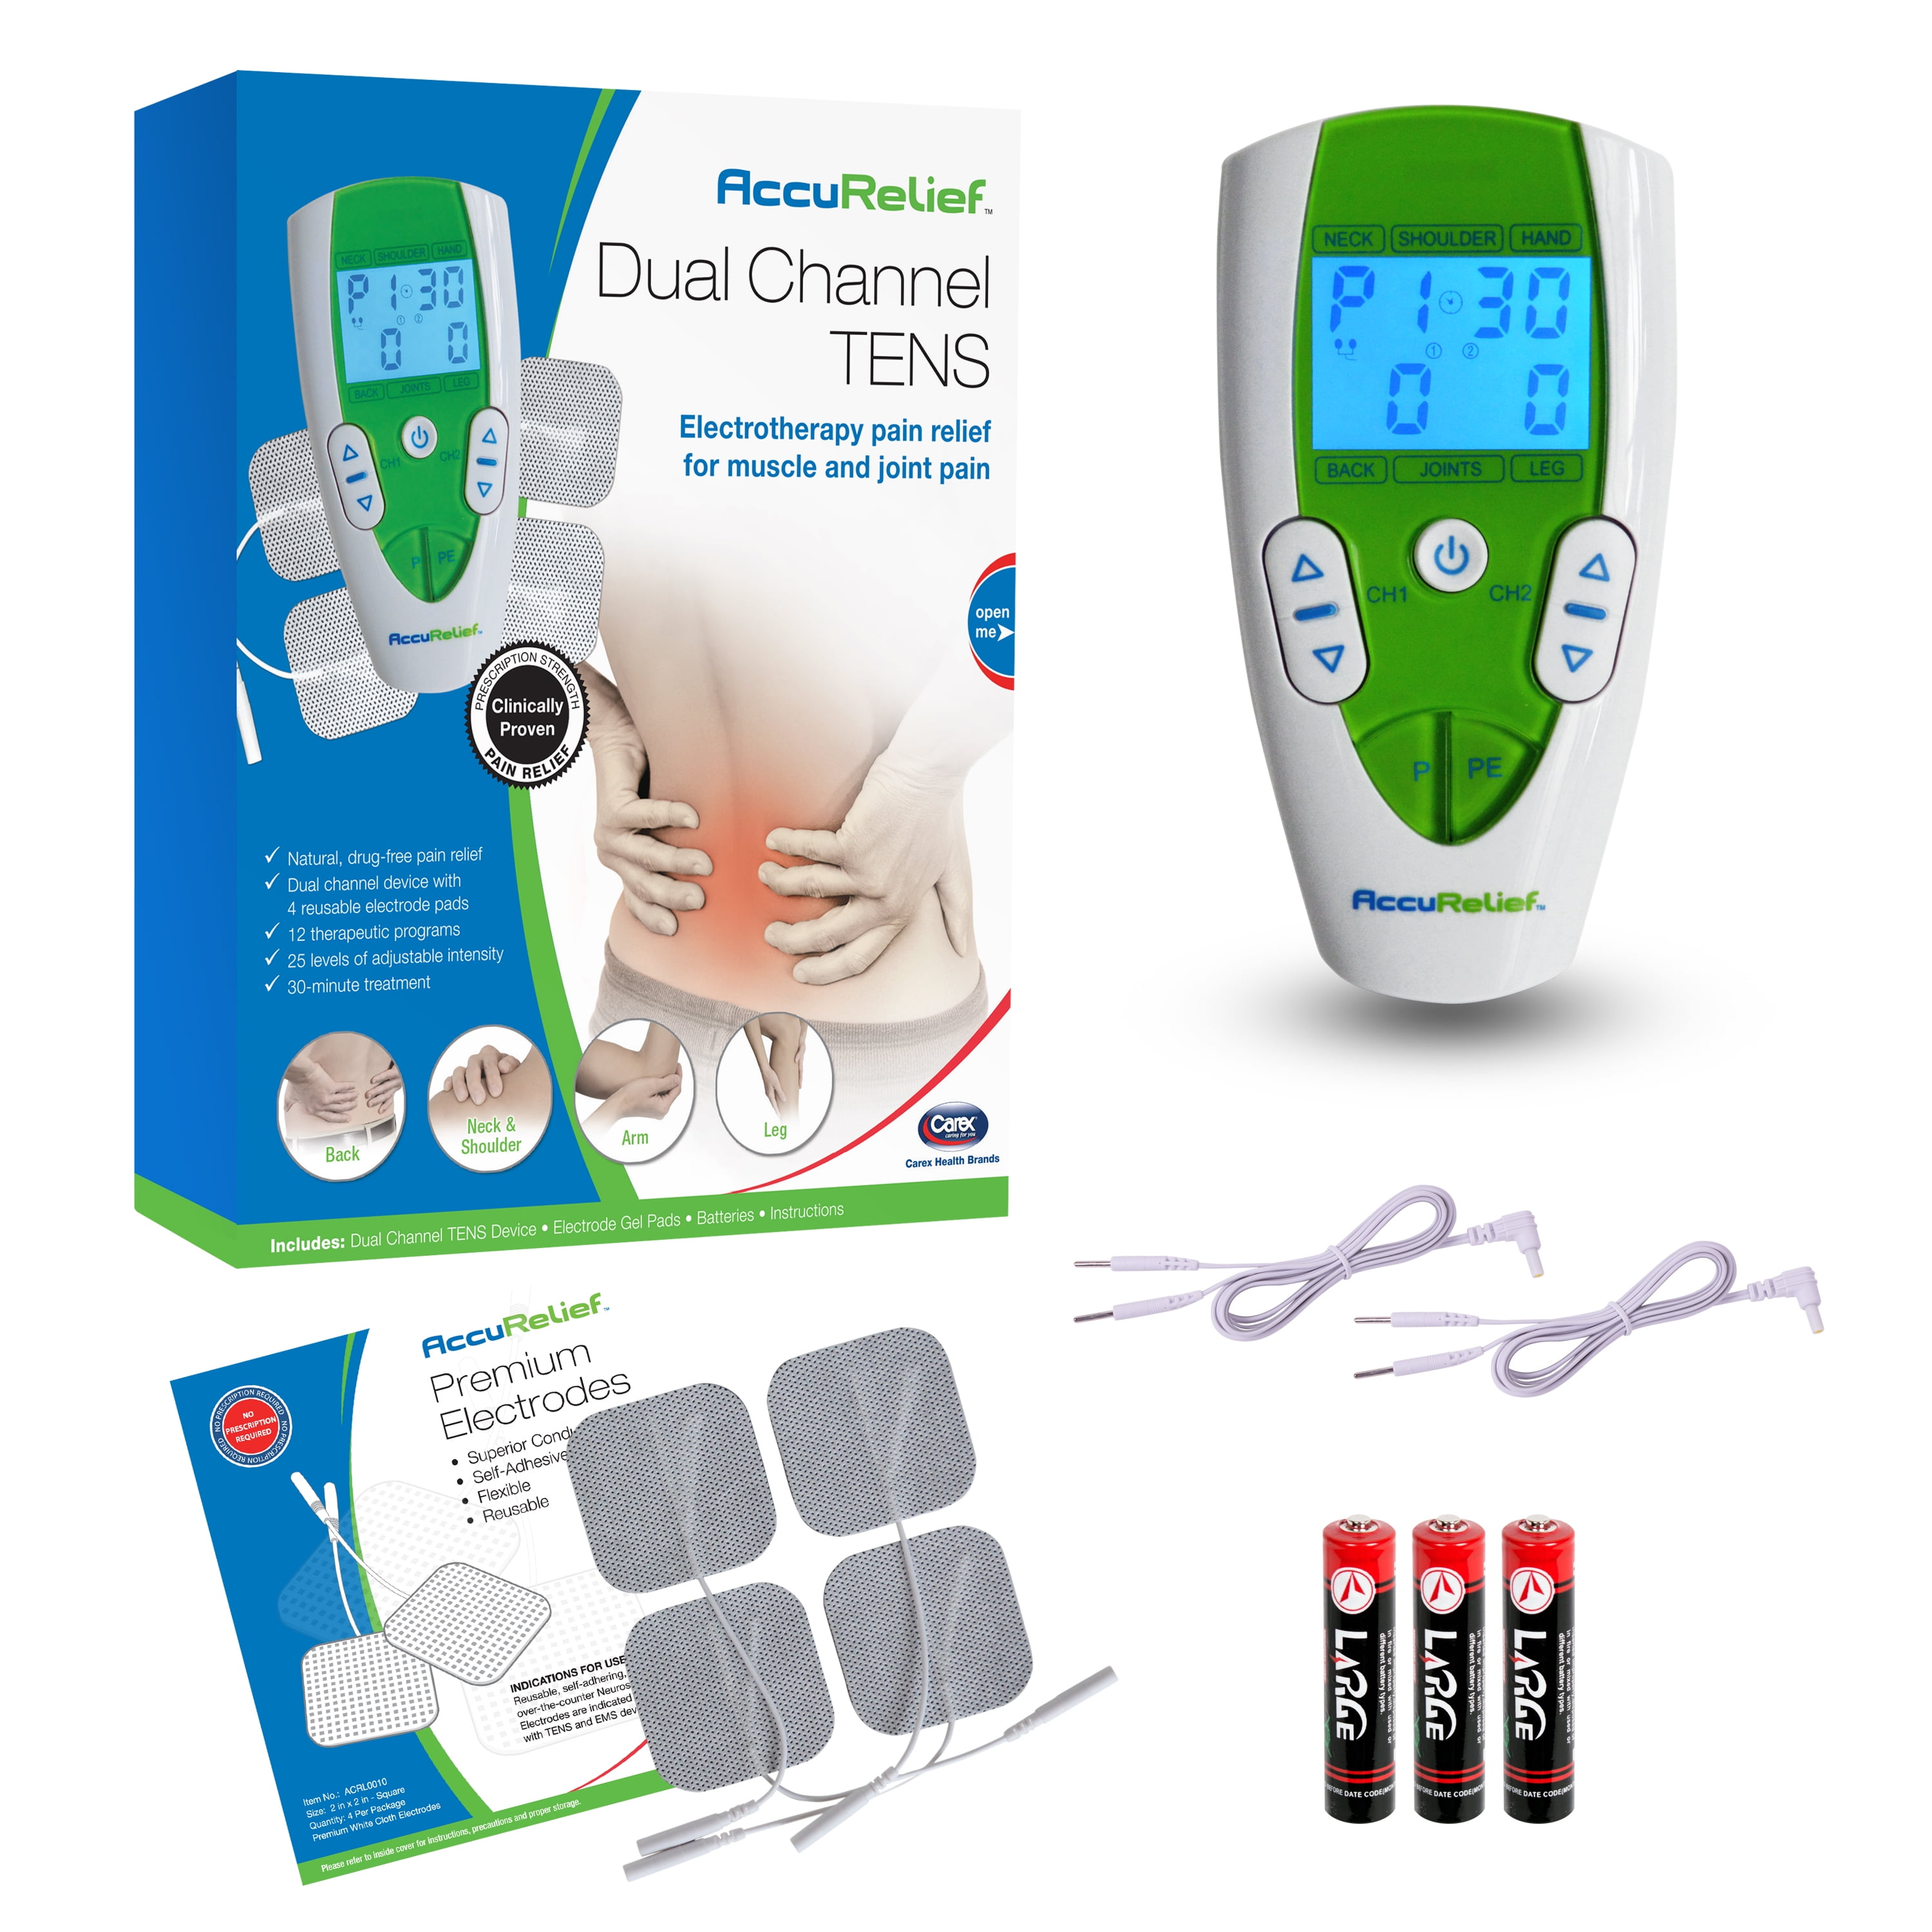 AccuRelief Dual Channel TENS Therapy Electrotherapy Pain Relief System - Wa...